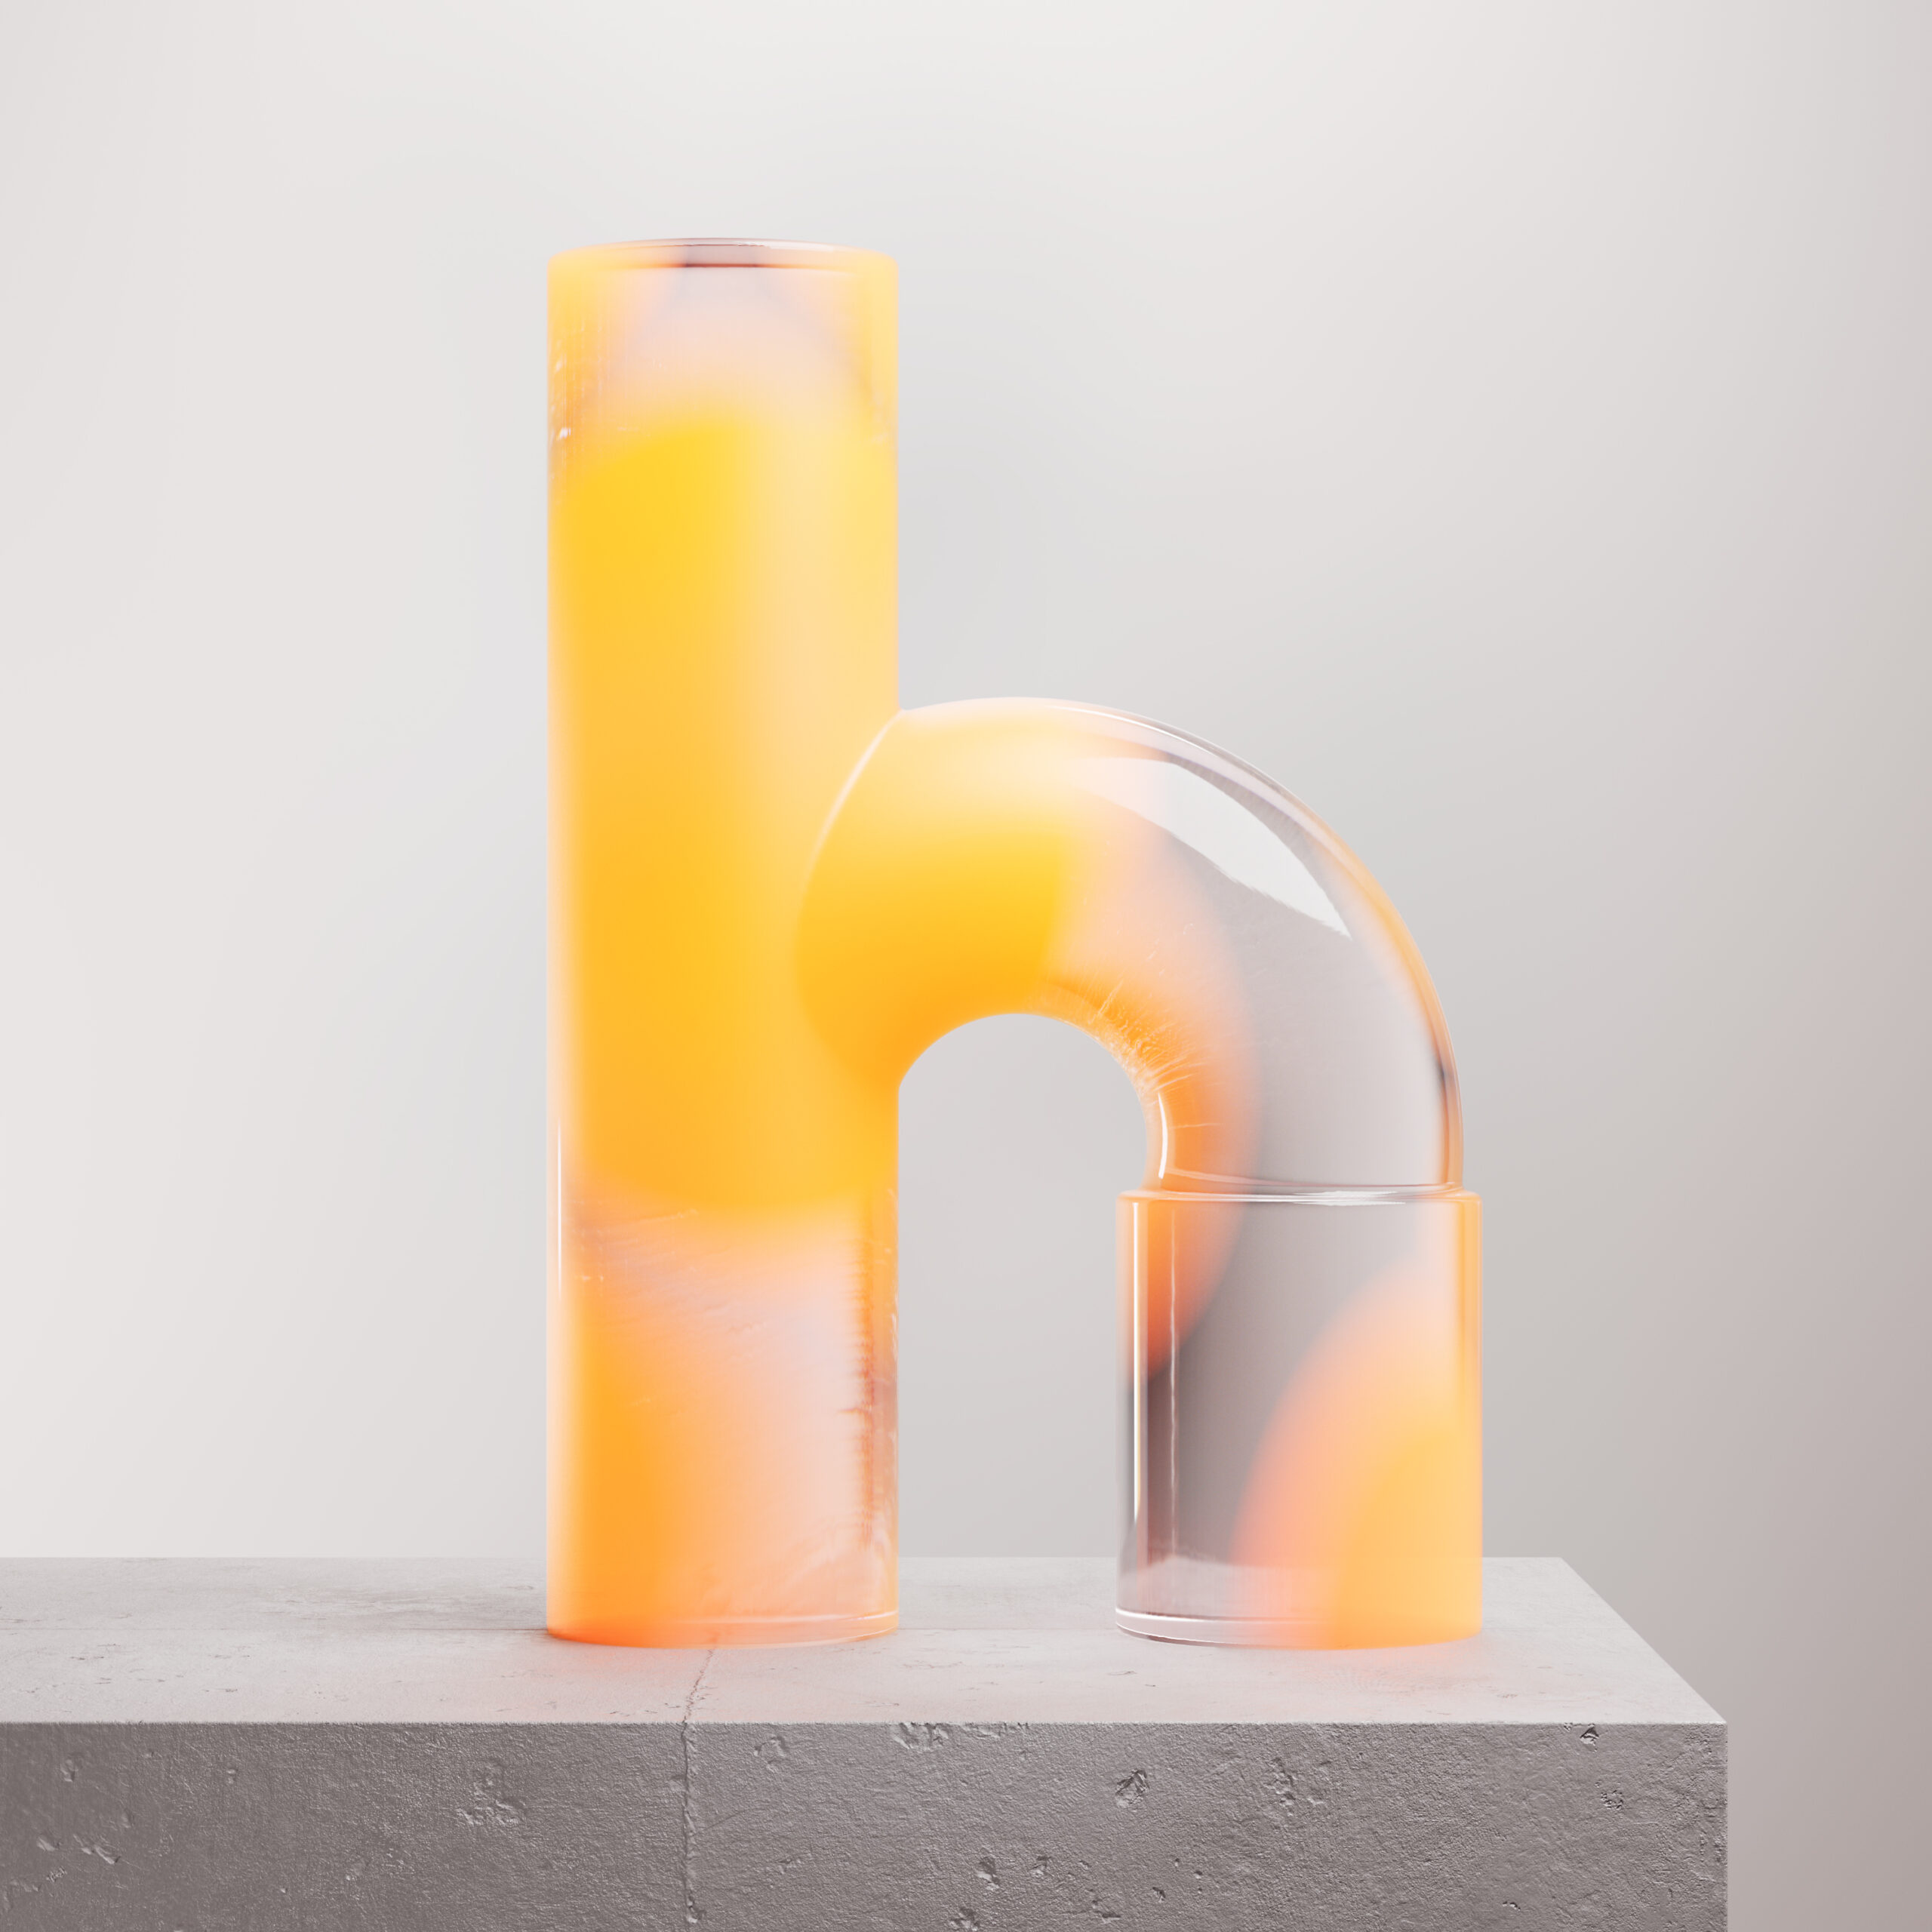 3D rendering of the letter H by Marco Bach